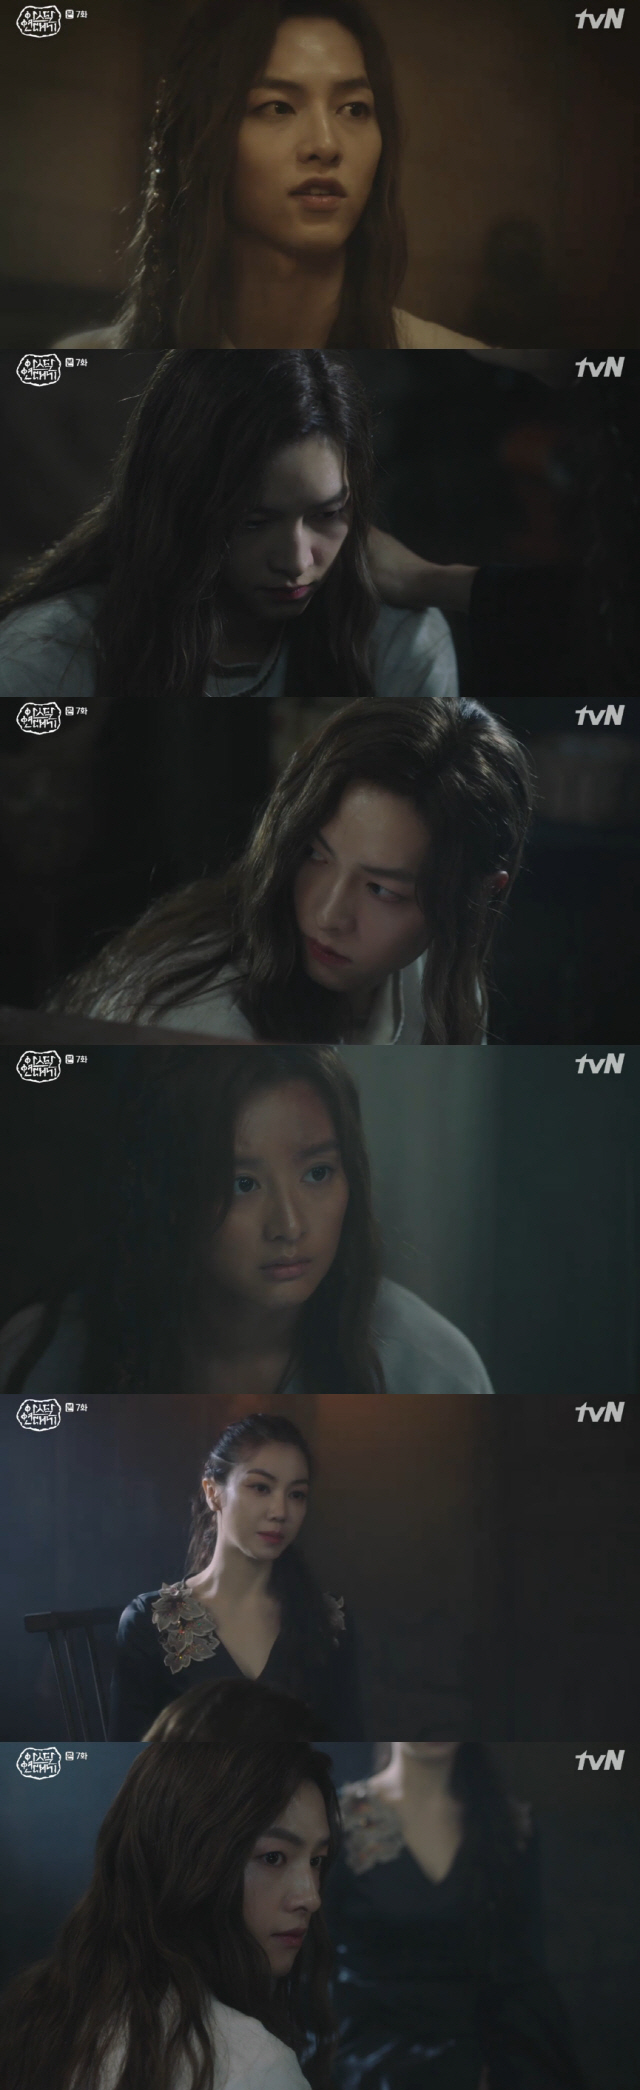 Asdal Chronicles Kim Ok-bin introduced Kim Ji-won to Song Joong-ki as a body.In the 7th episode of the Saturday drama tvN Asdal Chronicle broadcasted on the 22nd, the story about Sannarae was revealed.On this day, Taealha (Kim Ok-bin) visited Saya (Song Joong-ki) and asked, Do you think a lot these days? Do you blame me? And Saya replied, I used to blame you, but now Im fine.Taalha apologized to Saya for the matter.After introducing Tanya to Taalha, he said, It is a new body. You should educate him well. What do you know when he is a Dusm student?The story of the bird was revealed on this day: the past was a woman named Saya, who had filled her bracelet with the bird and planned to flee at night.However, Taealha, who had noticed this in advance, killed the new Europe and returned the bloody bracelet to Saya.Dont bother the bird anymore, Tanya (Kim Ji-won) said in front of Tagon (Jang Dong-gun) and Taealha, which was thanks to the dream that the silver island had made, which saved Tanyas life.